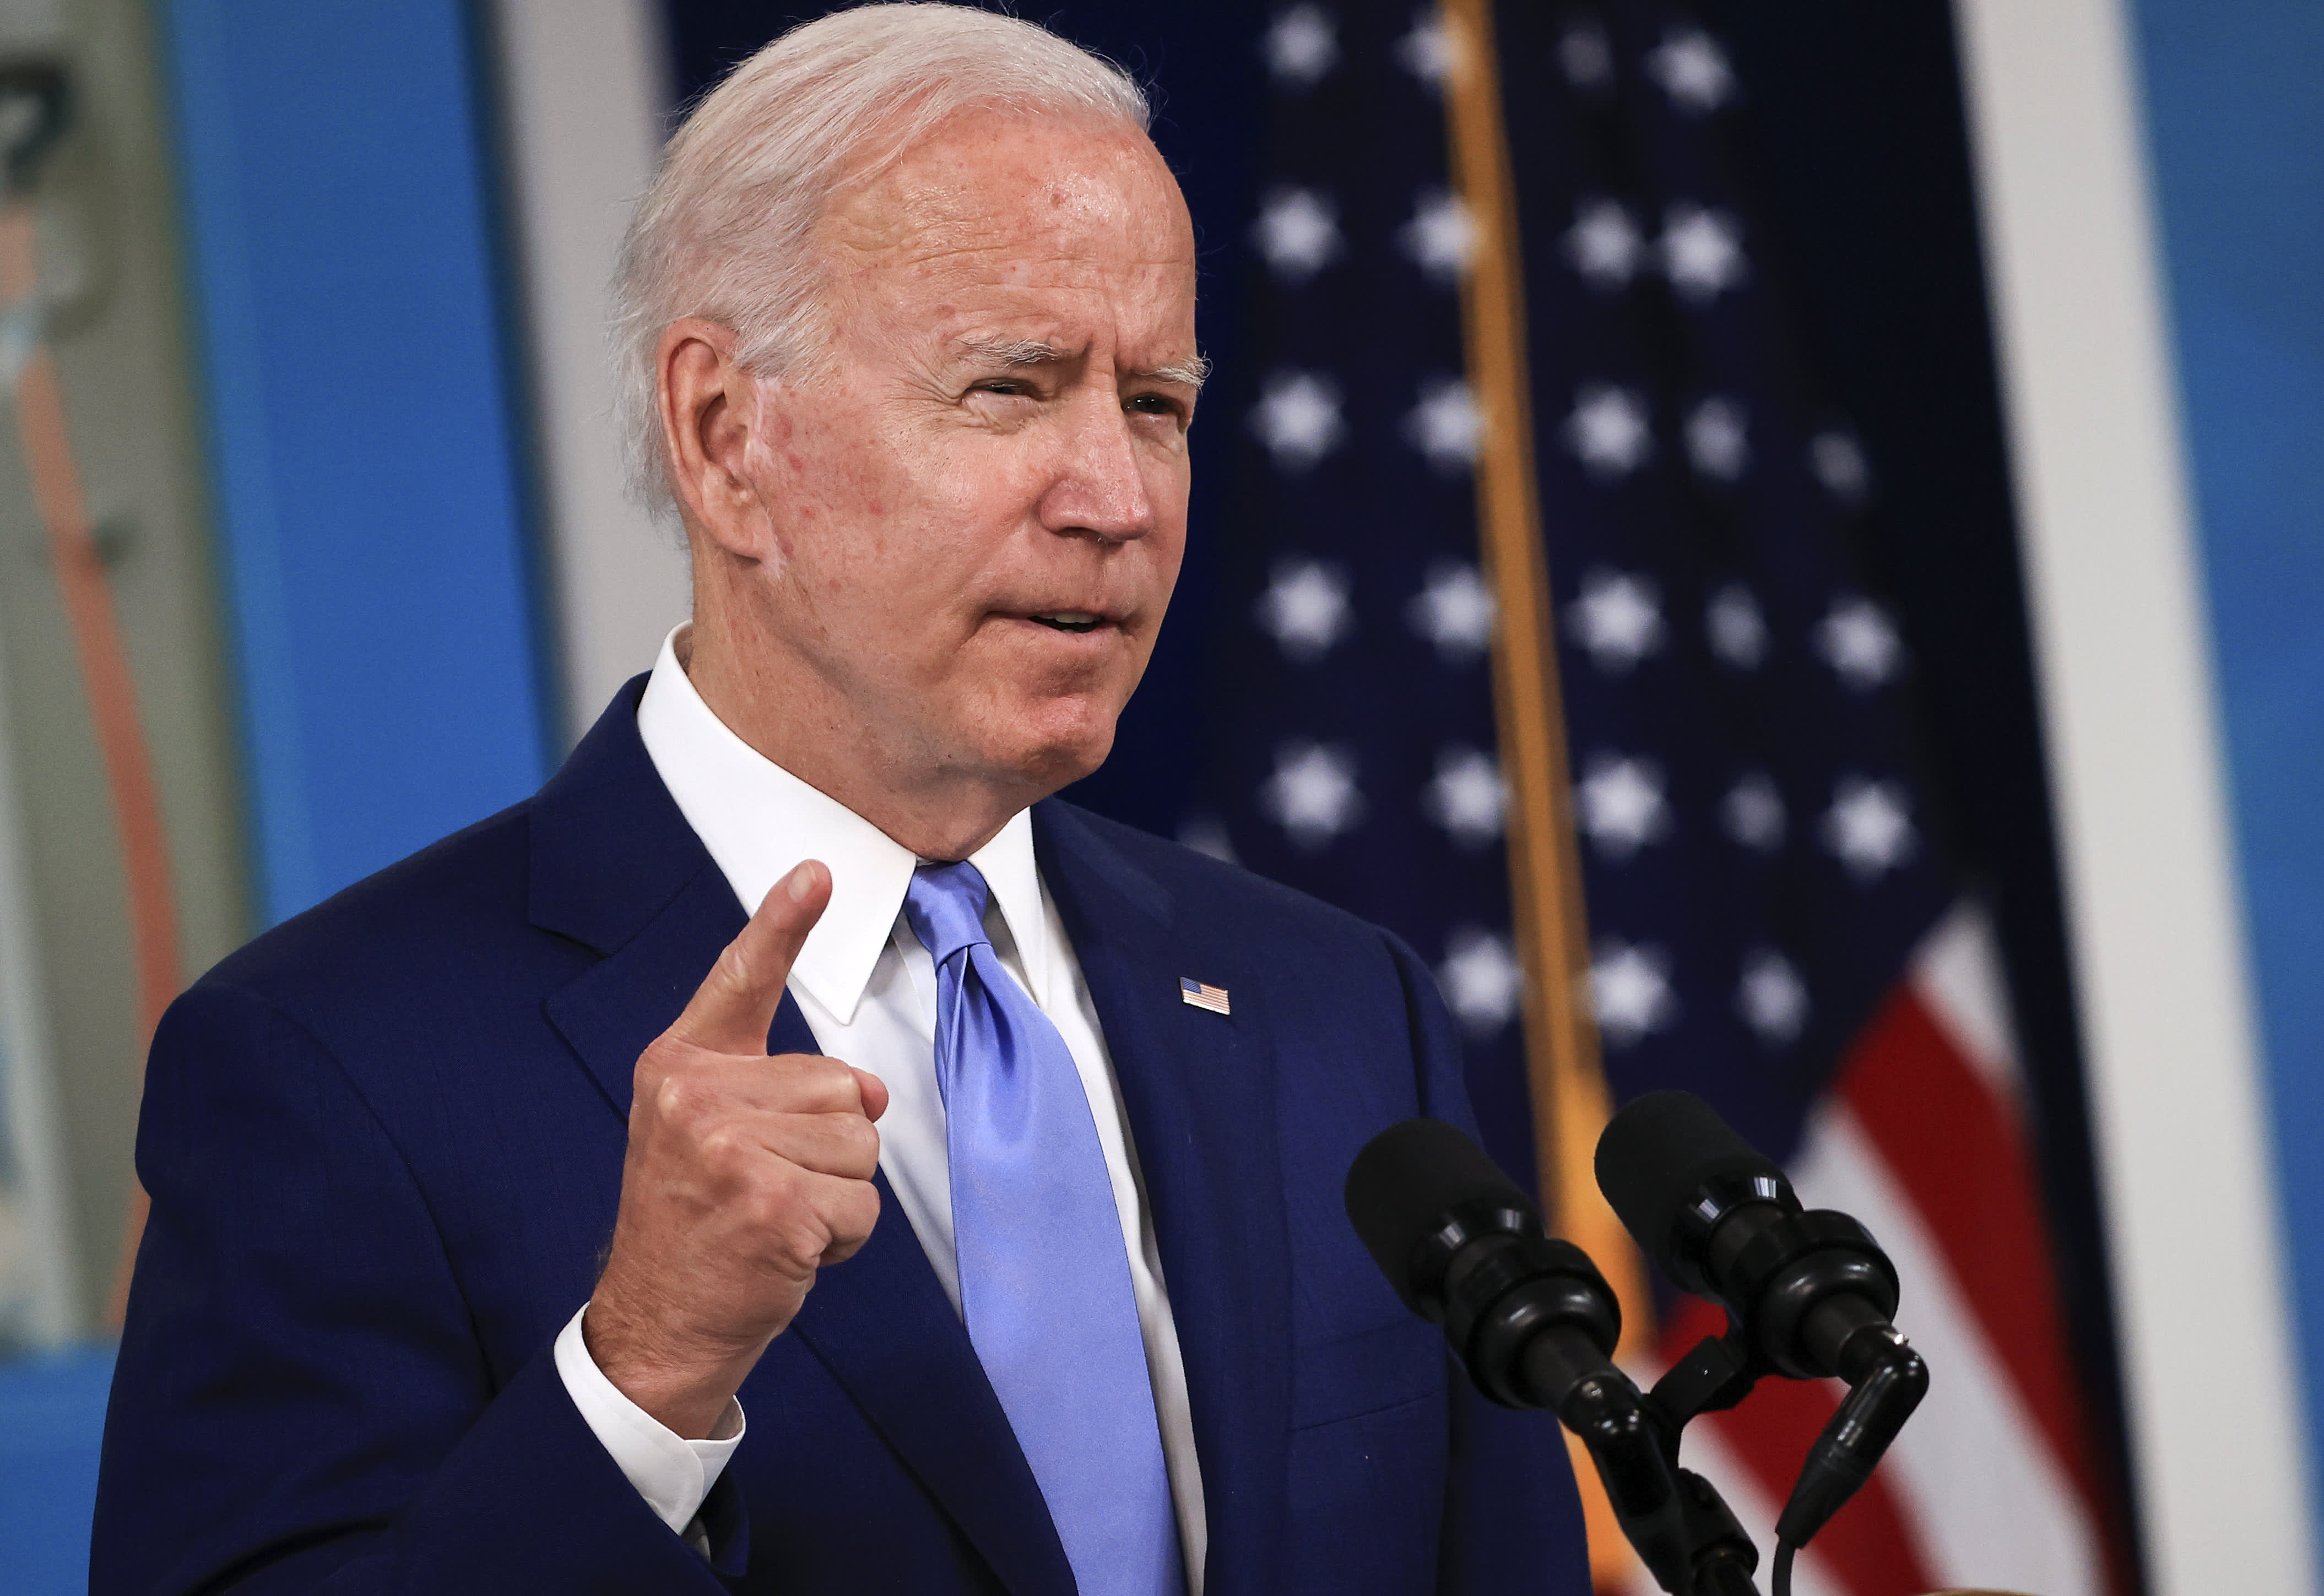 Biden shows plan to address major financial risks posed by climate change – CNBC